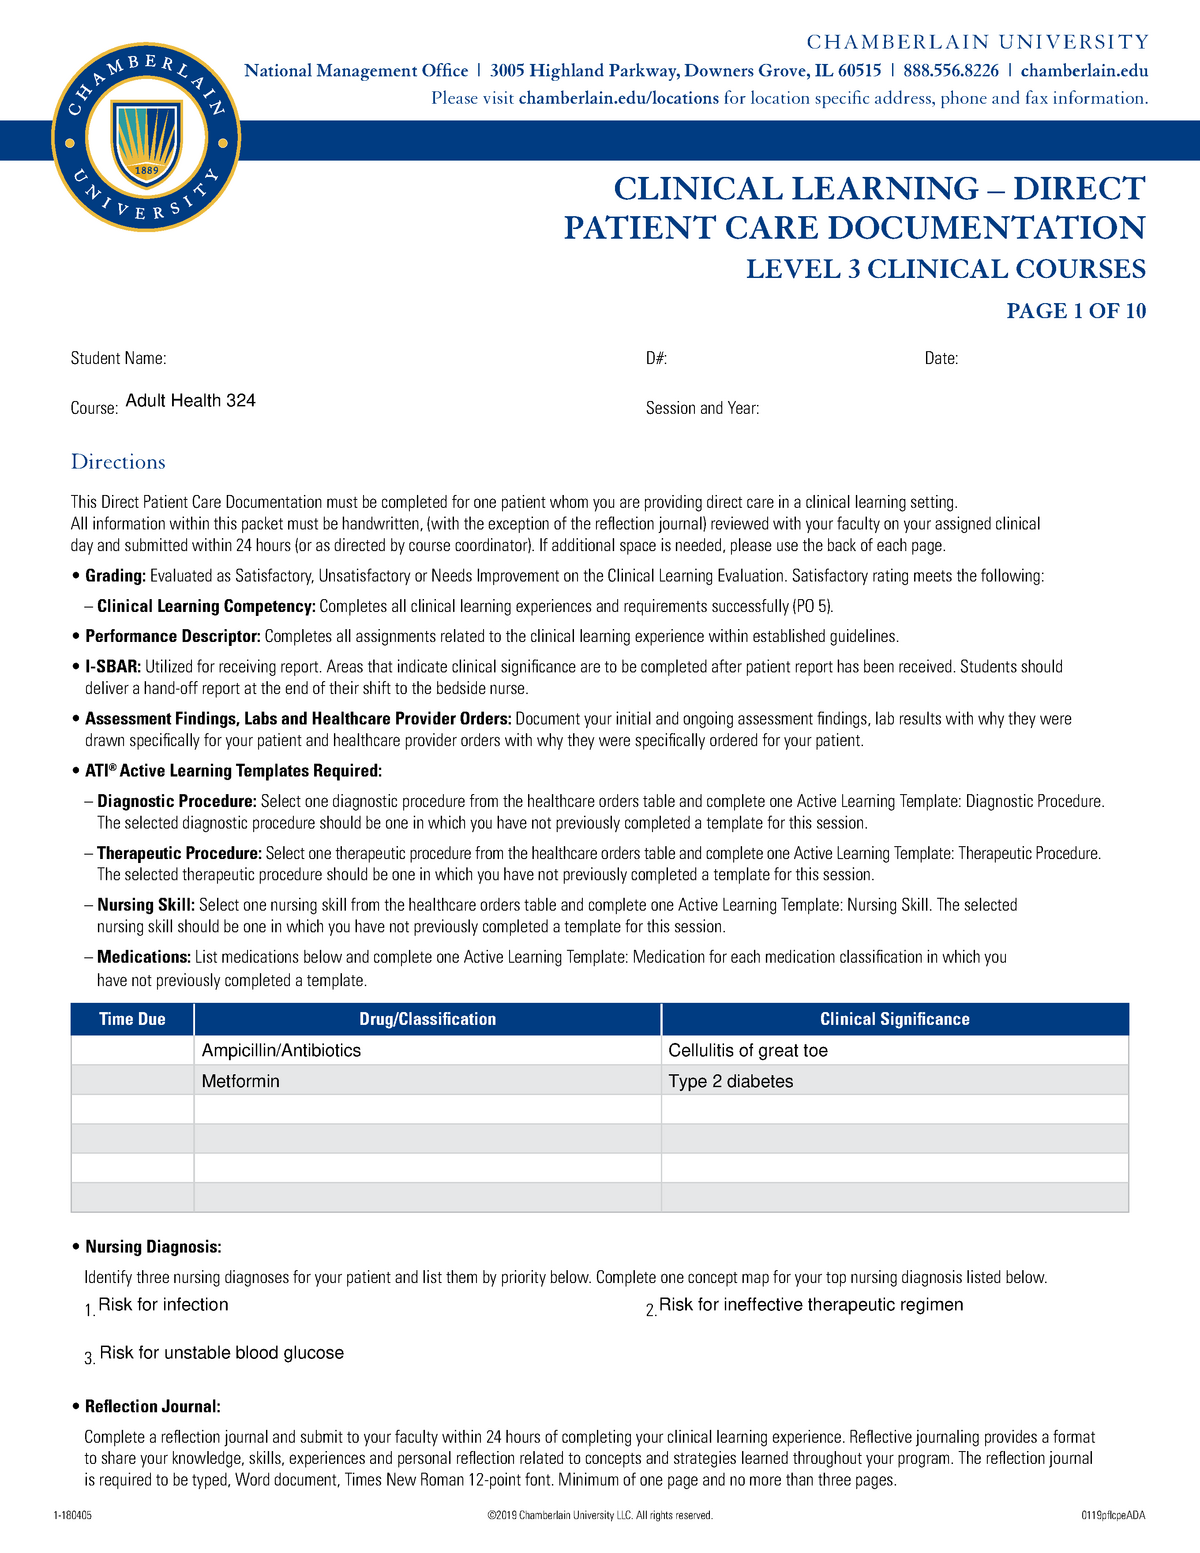 Care Documentation Care Plan CLINICAL LEARNING DIRECT PATIENT